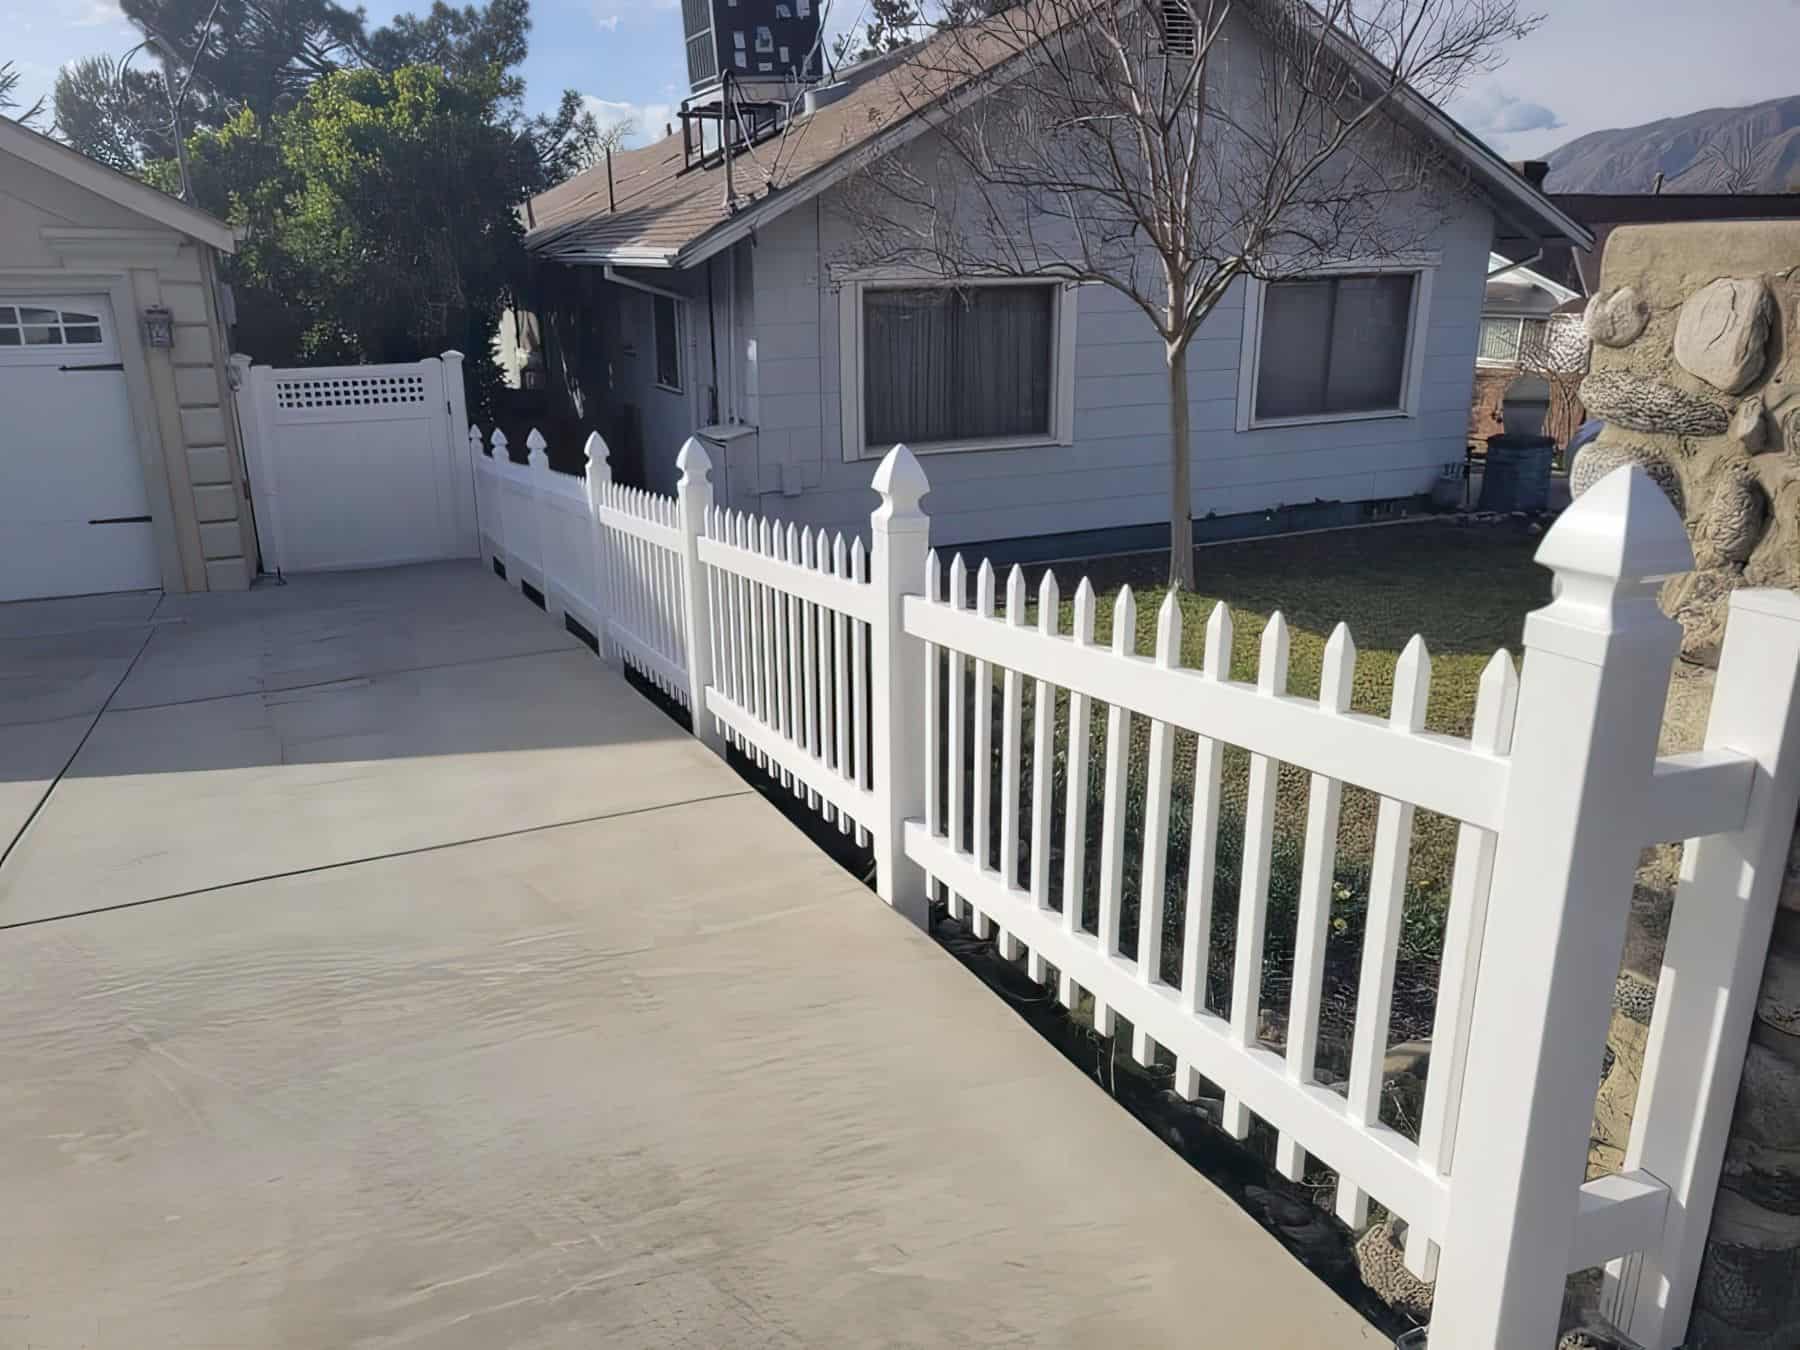 White vinyl vertical picket fence adjacent to vinyl gate, surrounding a lawn of a house with green grass.